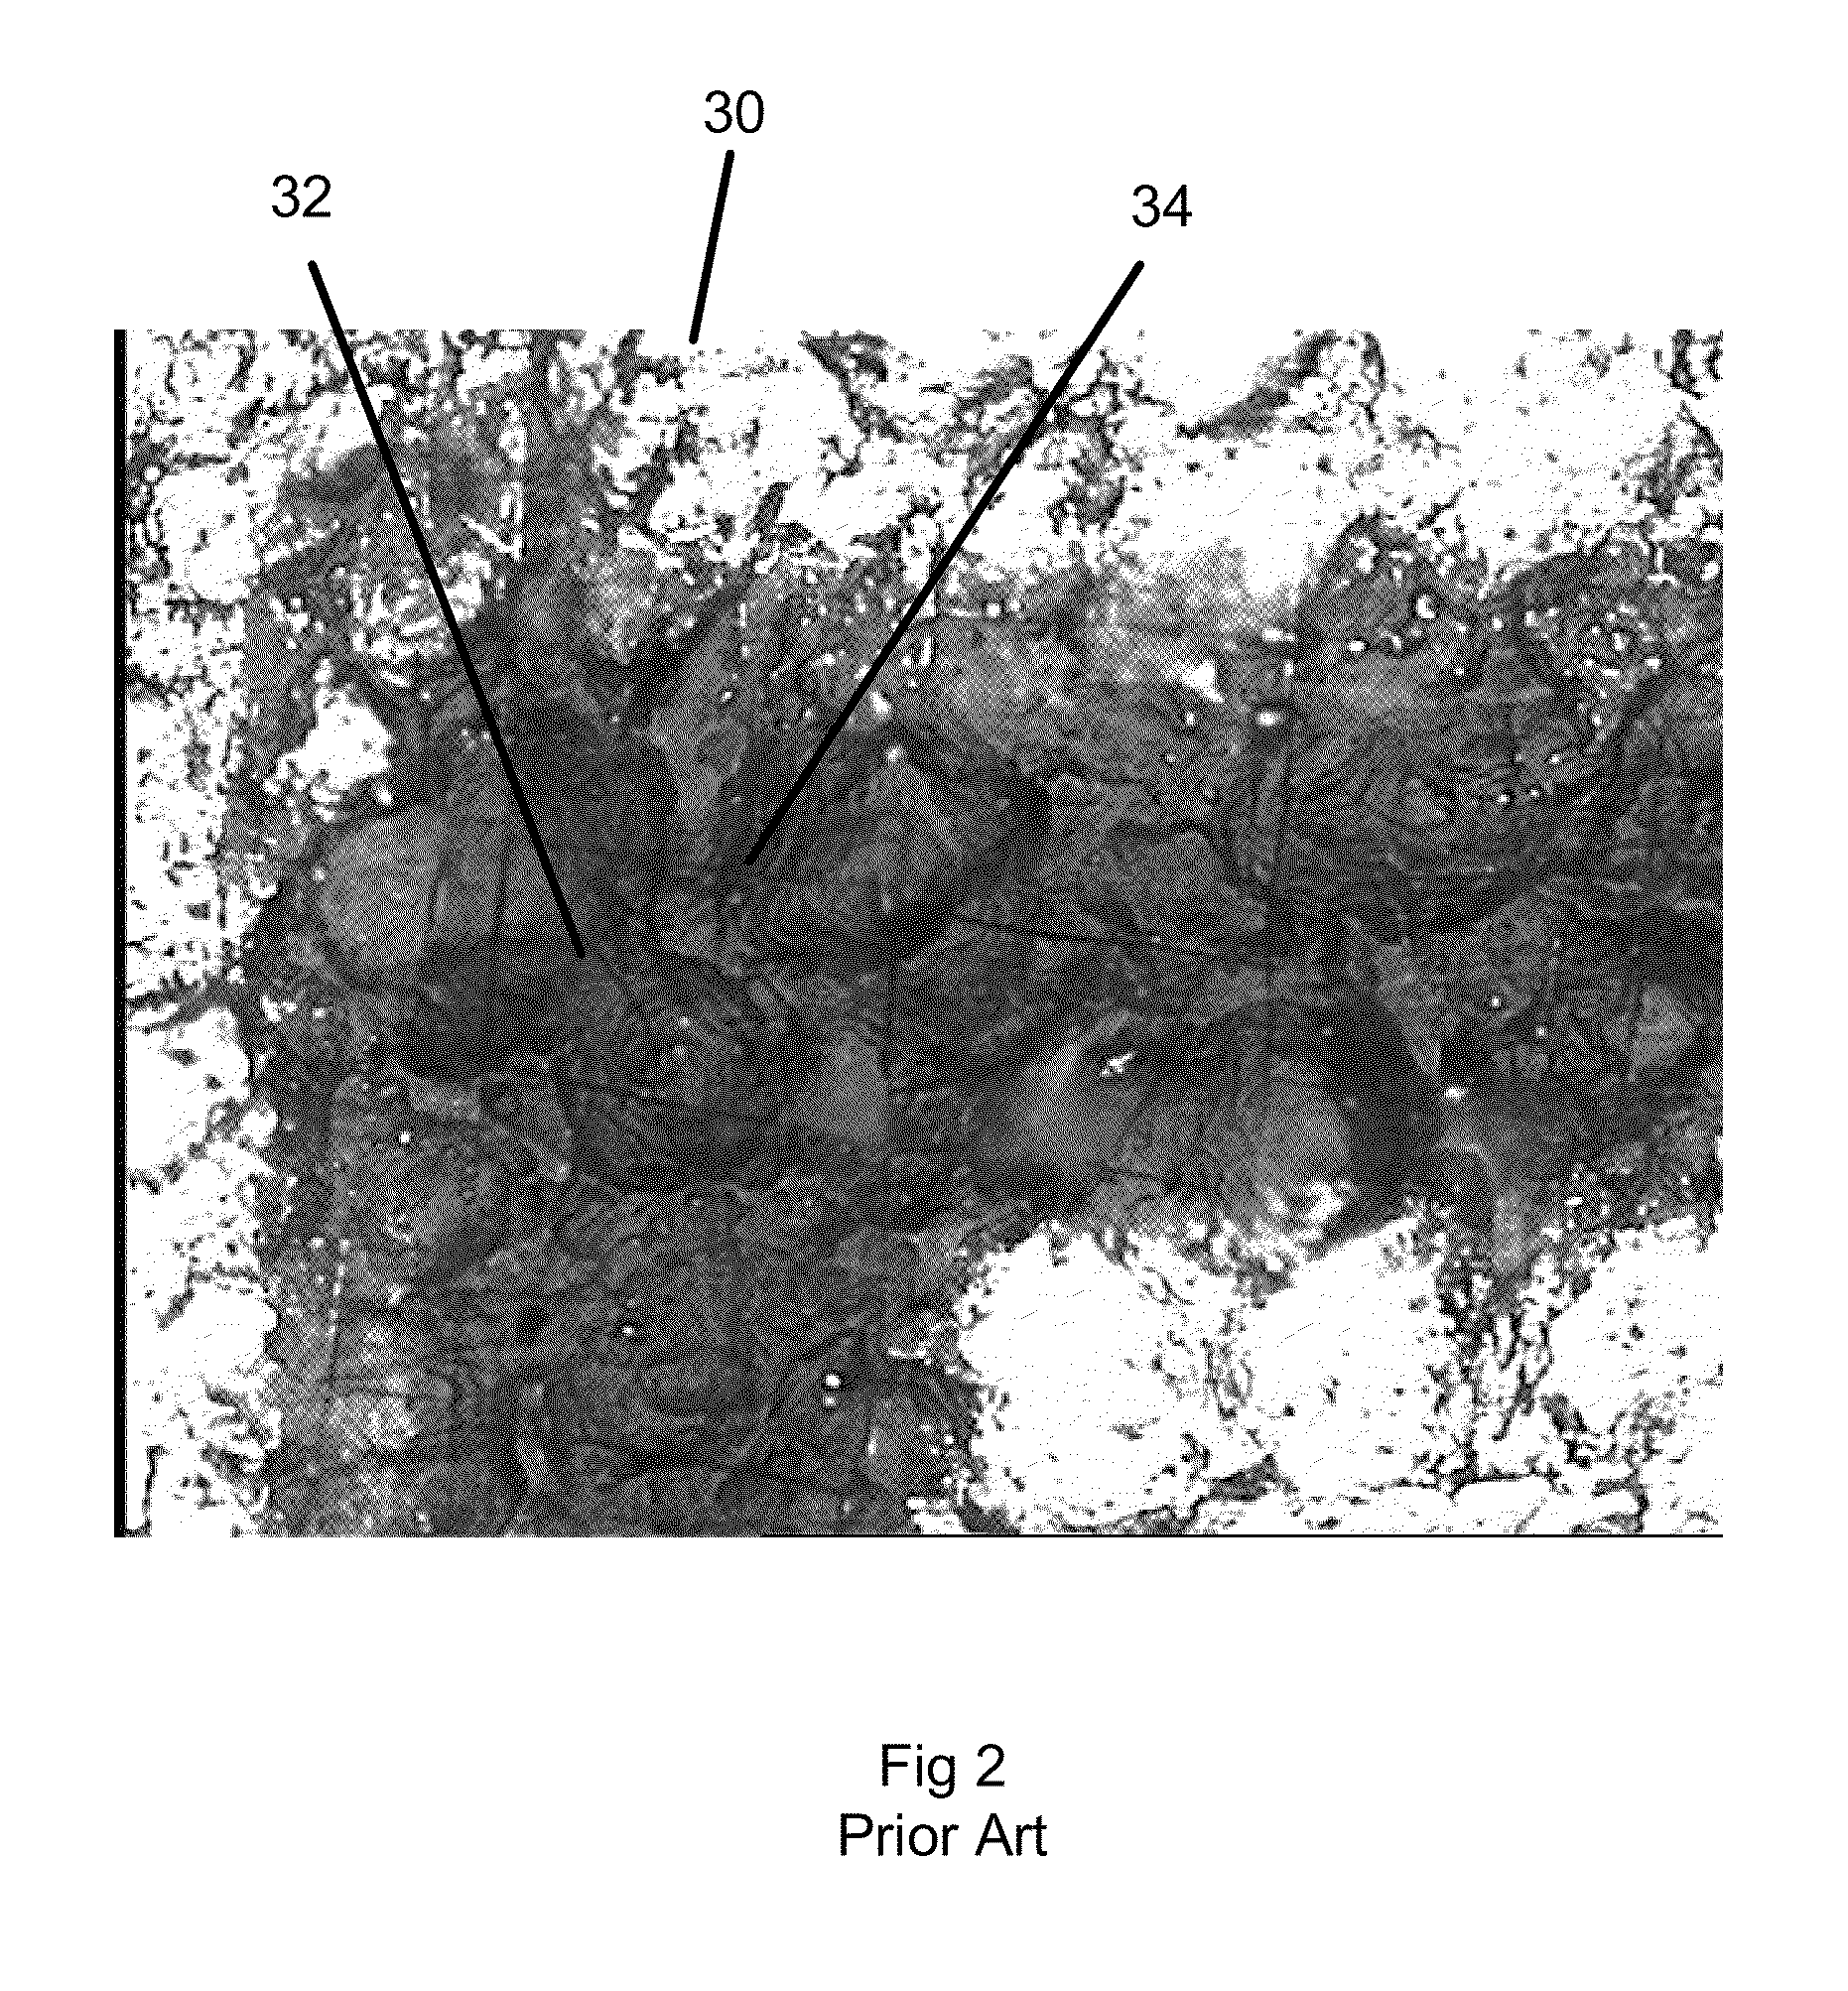 Method and apparatus for reliably laser marking articles